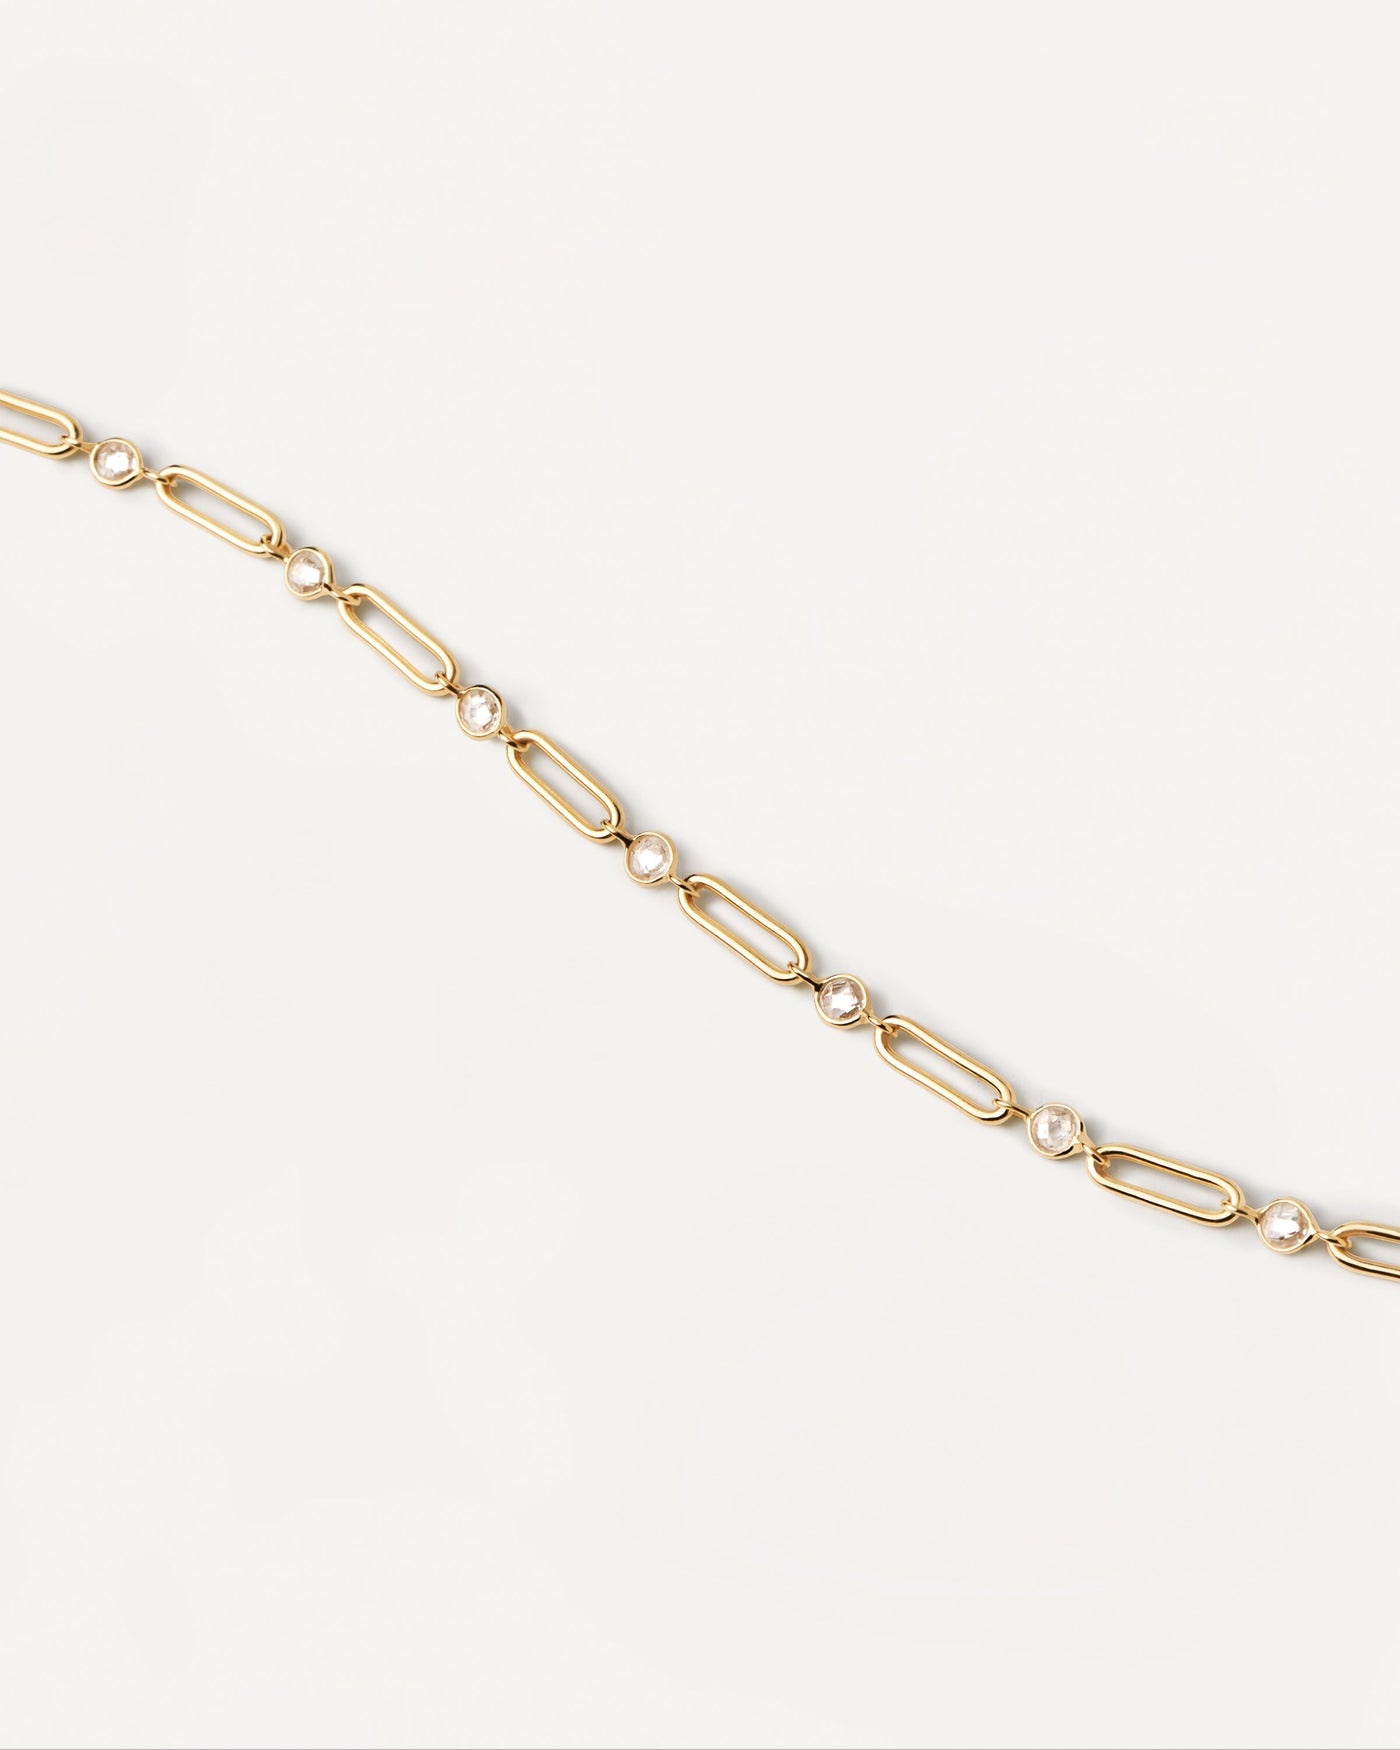 2023 Selection | Miami Chain Bracelet. Large link bracelet in gold-plated silver set with white zirconia. Get the latest arrival from PDPAOLA. Place your order safely and get this Best Seller. Free Shipping.